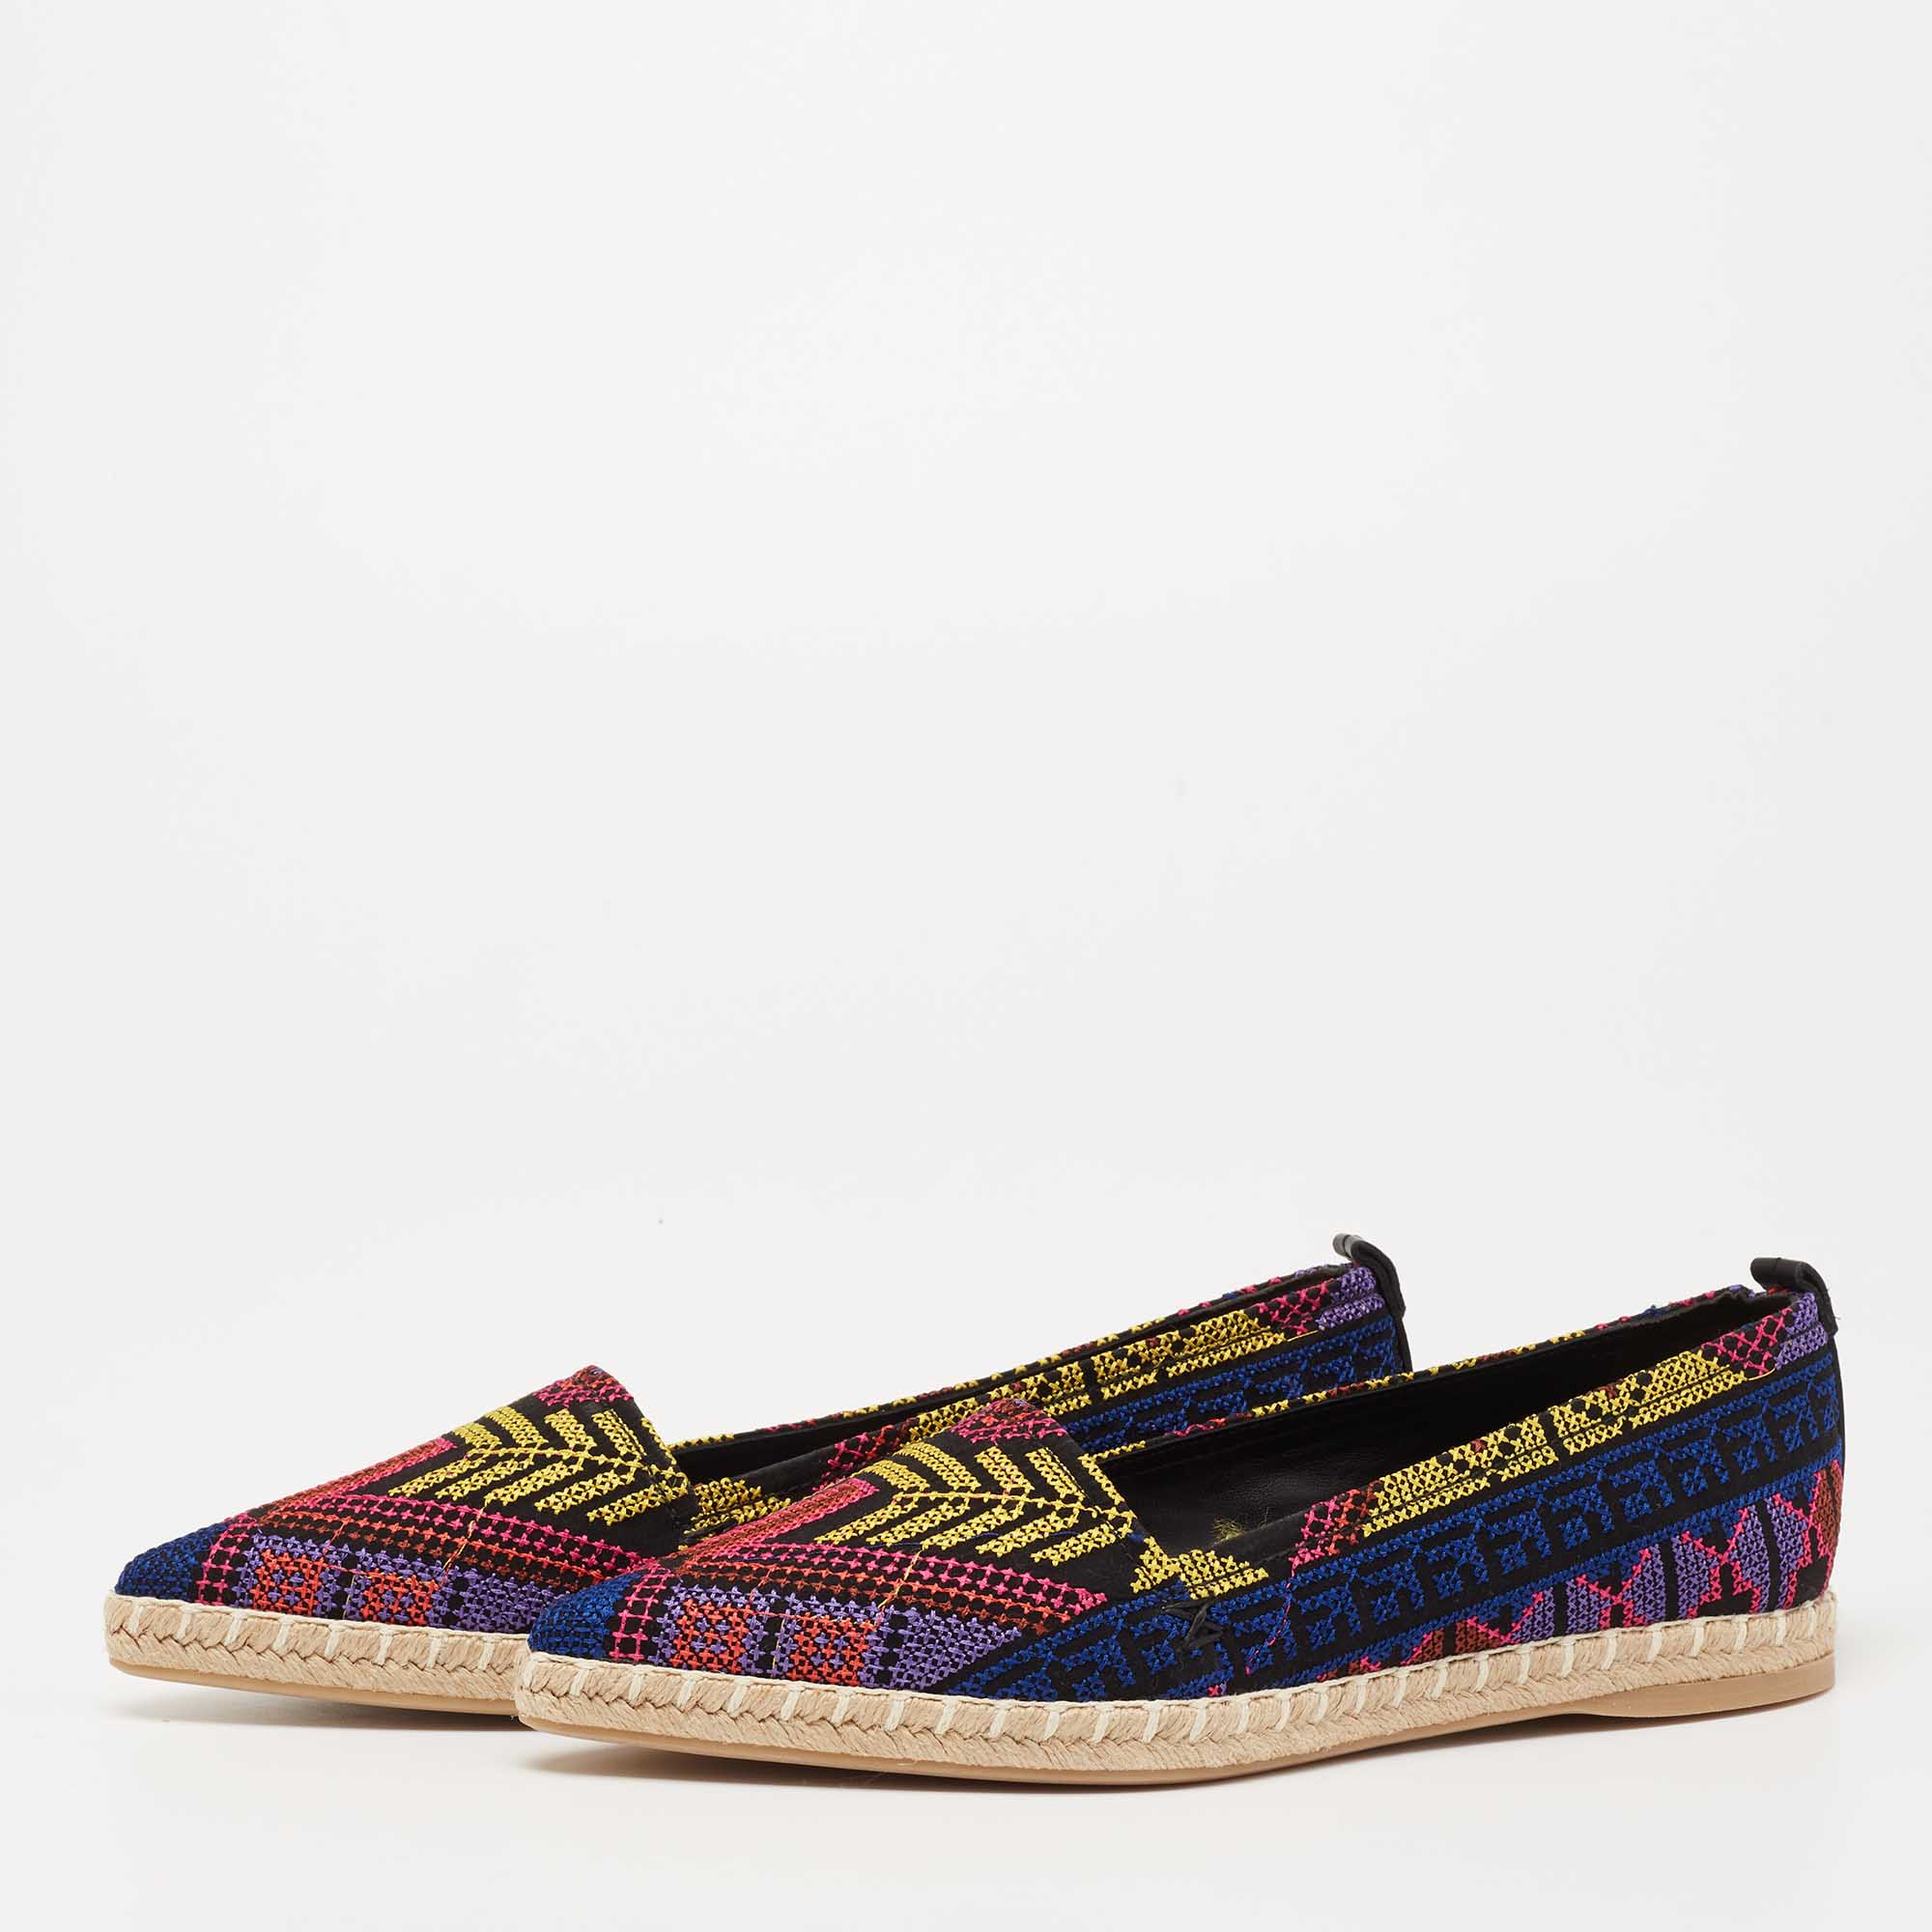 Nicholas Kirkwood Multicolor Embroidered Fabric Mexican Pointed Toe Espadrille Flats Size